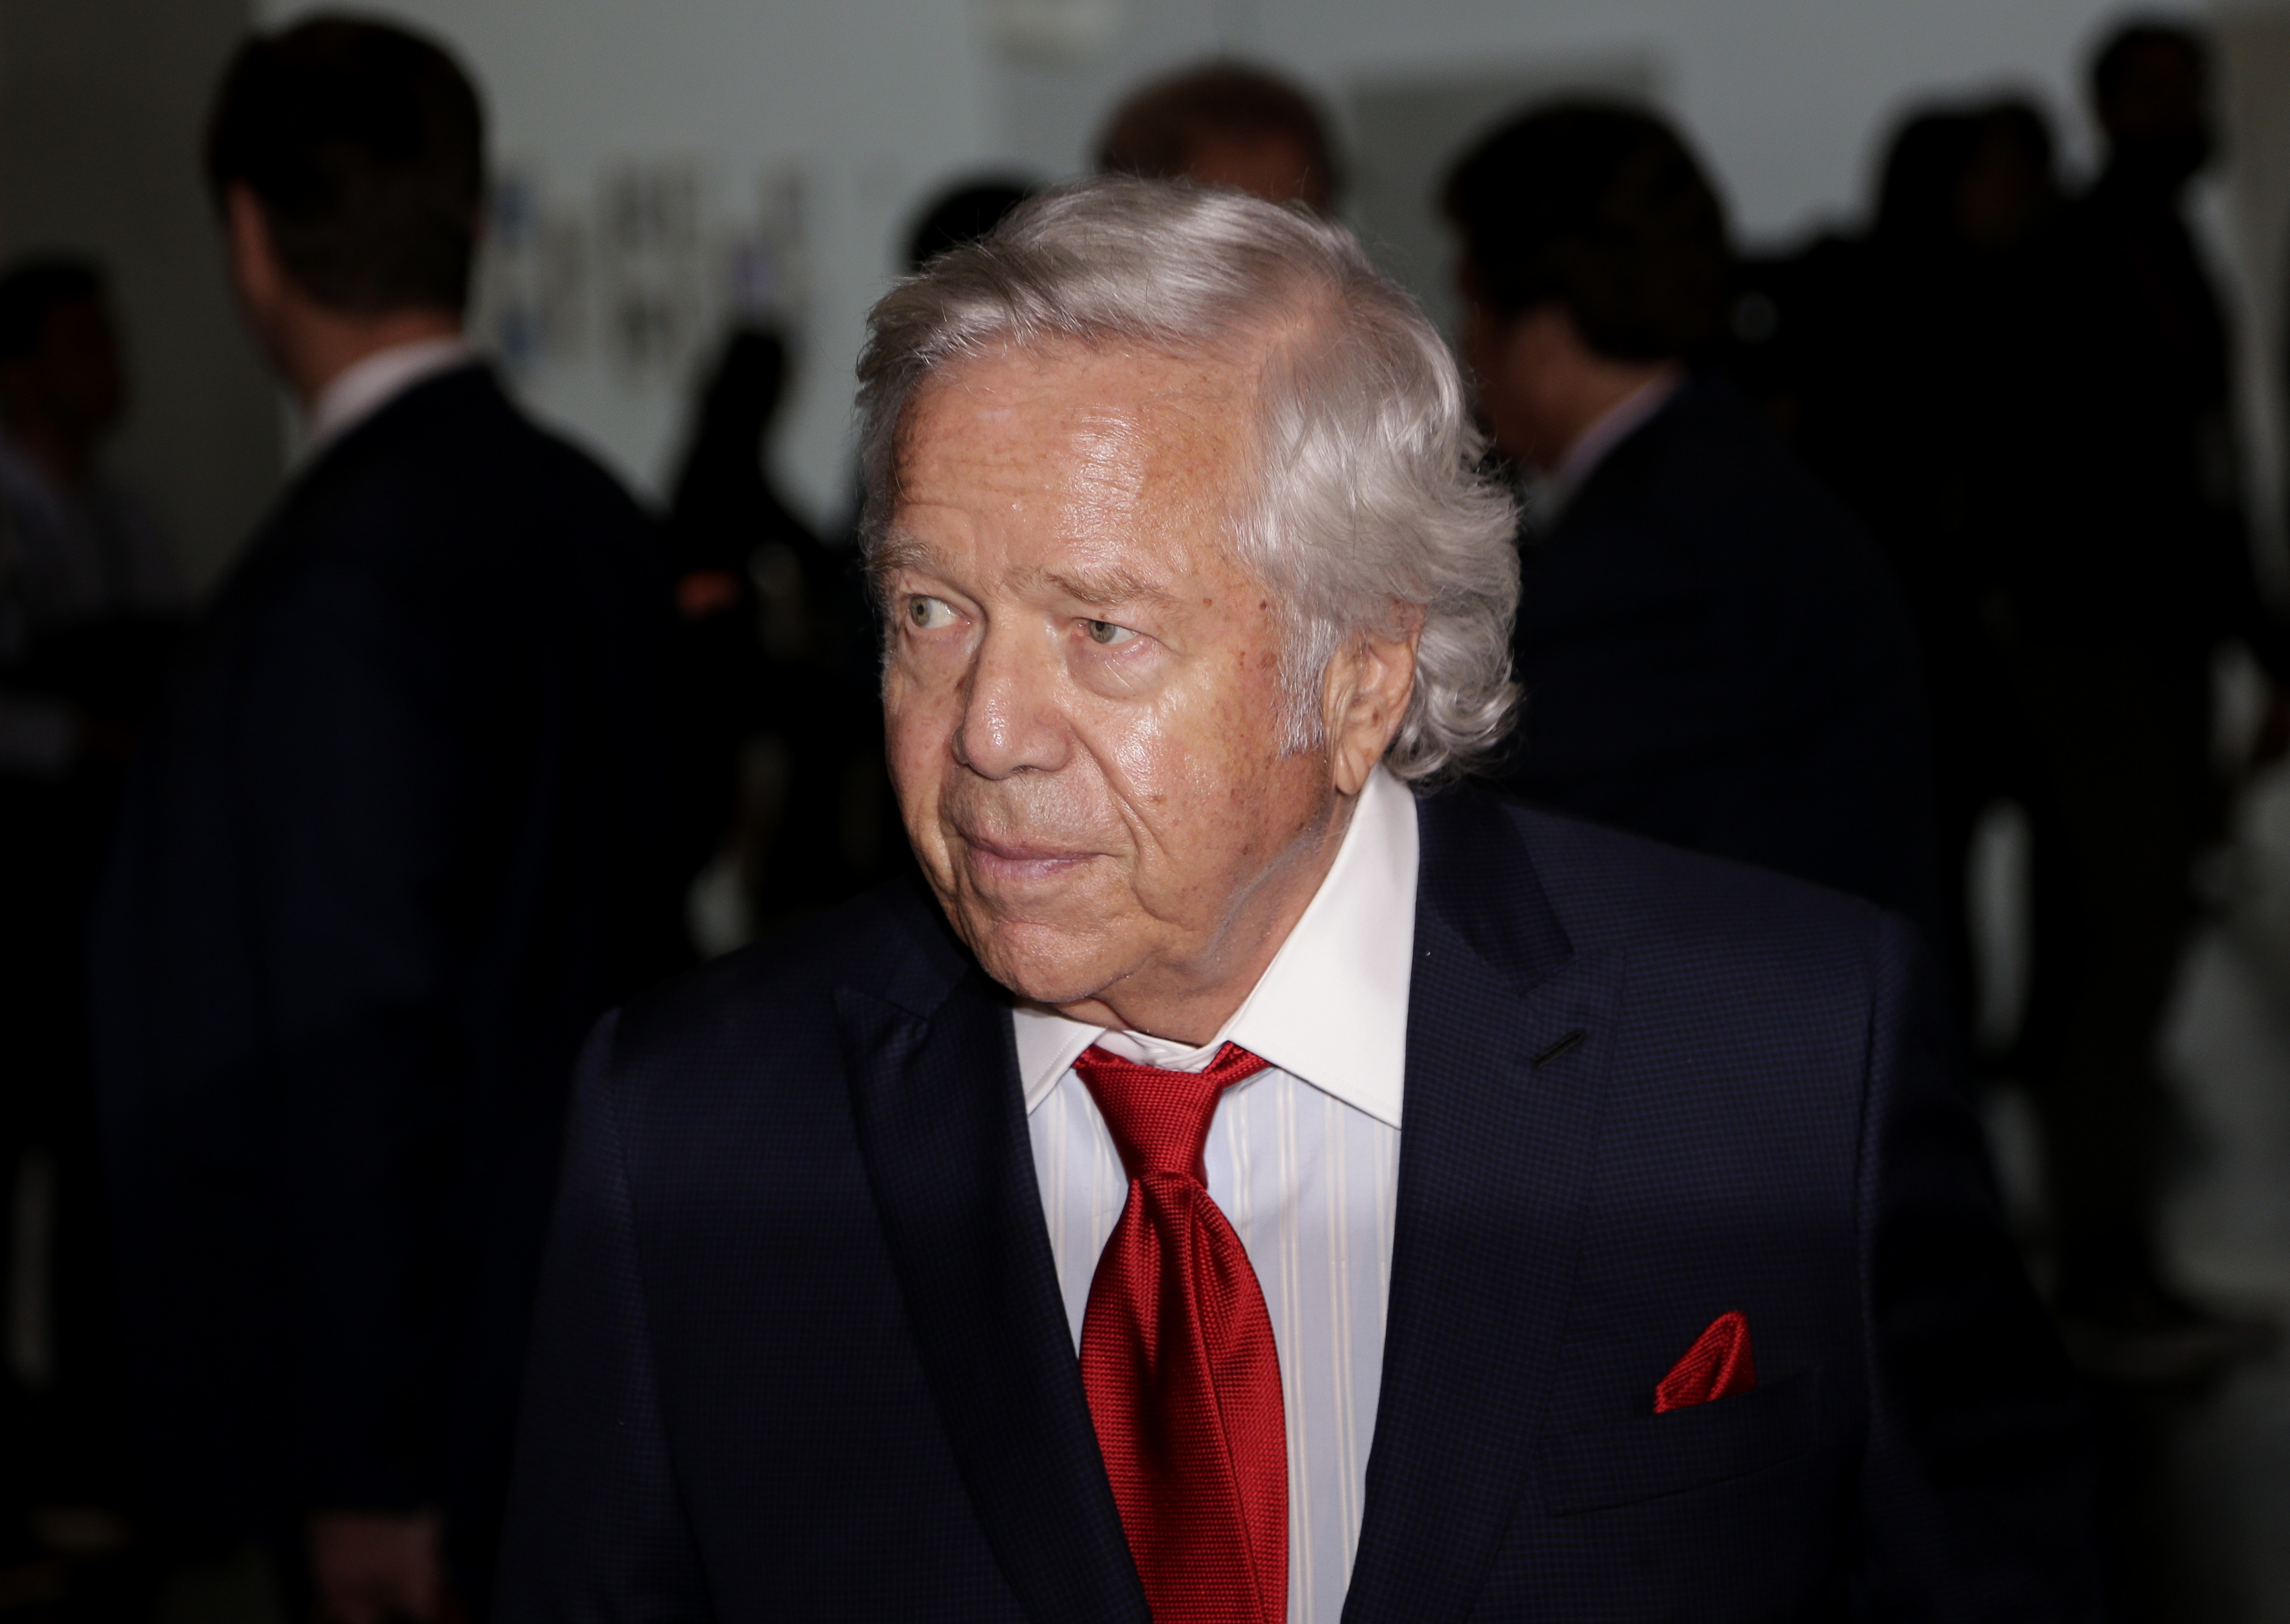 File - In this Oct. 16, 2018 file photo, New England Patriots owner Robert Kraft arrives for the NFL football fall meetings in New York. On Wednesday, Jan. 9, 2019, Kraft was awarded Israel's 2019 Genesis Prize, a $1 million recognition widely known as the "Jewish Nobel Prize." Organizers of the prize announced they were recognizing Kraft's philanthropy and commitment to Israel. (AP Photo/Seth Wenig, File)